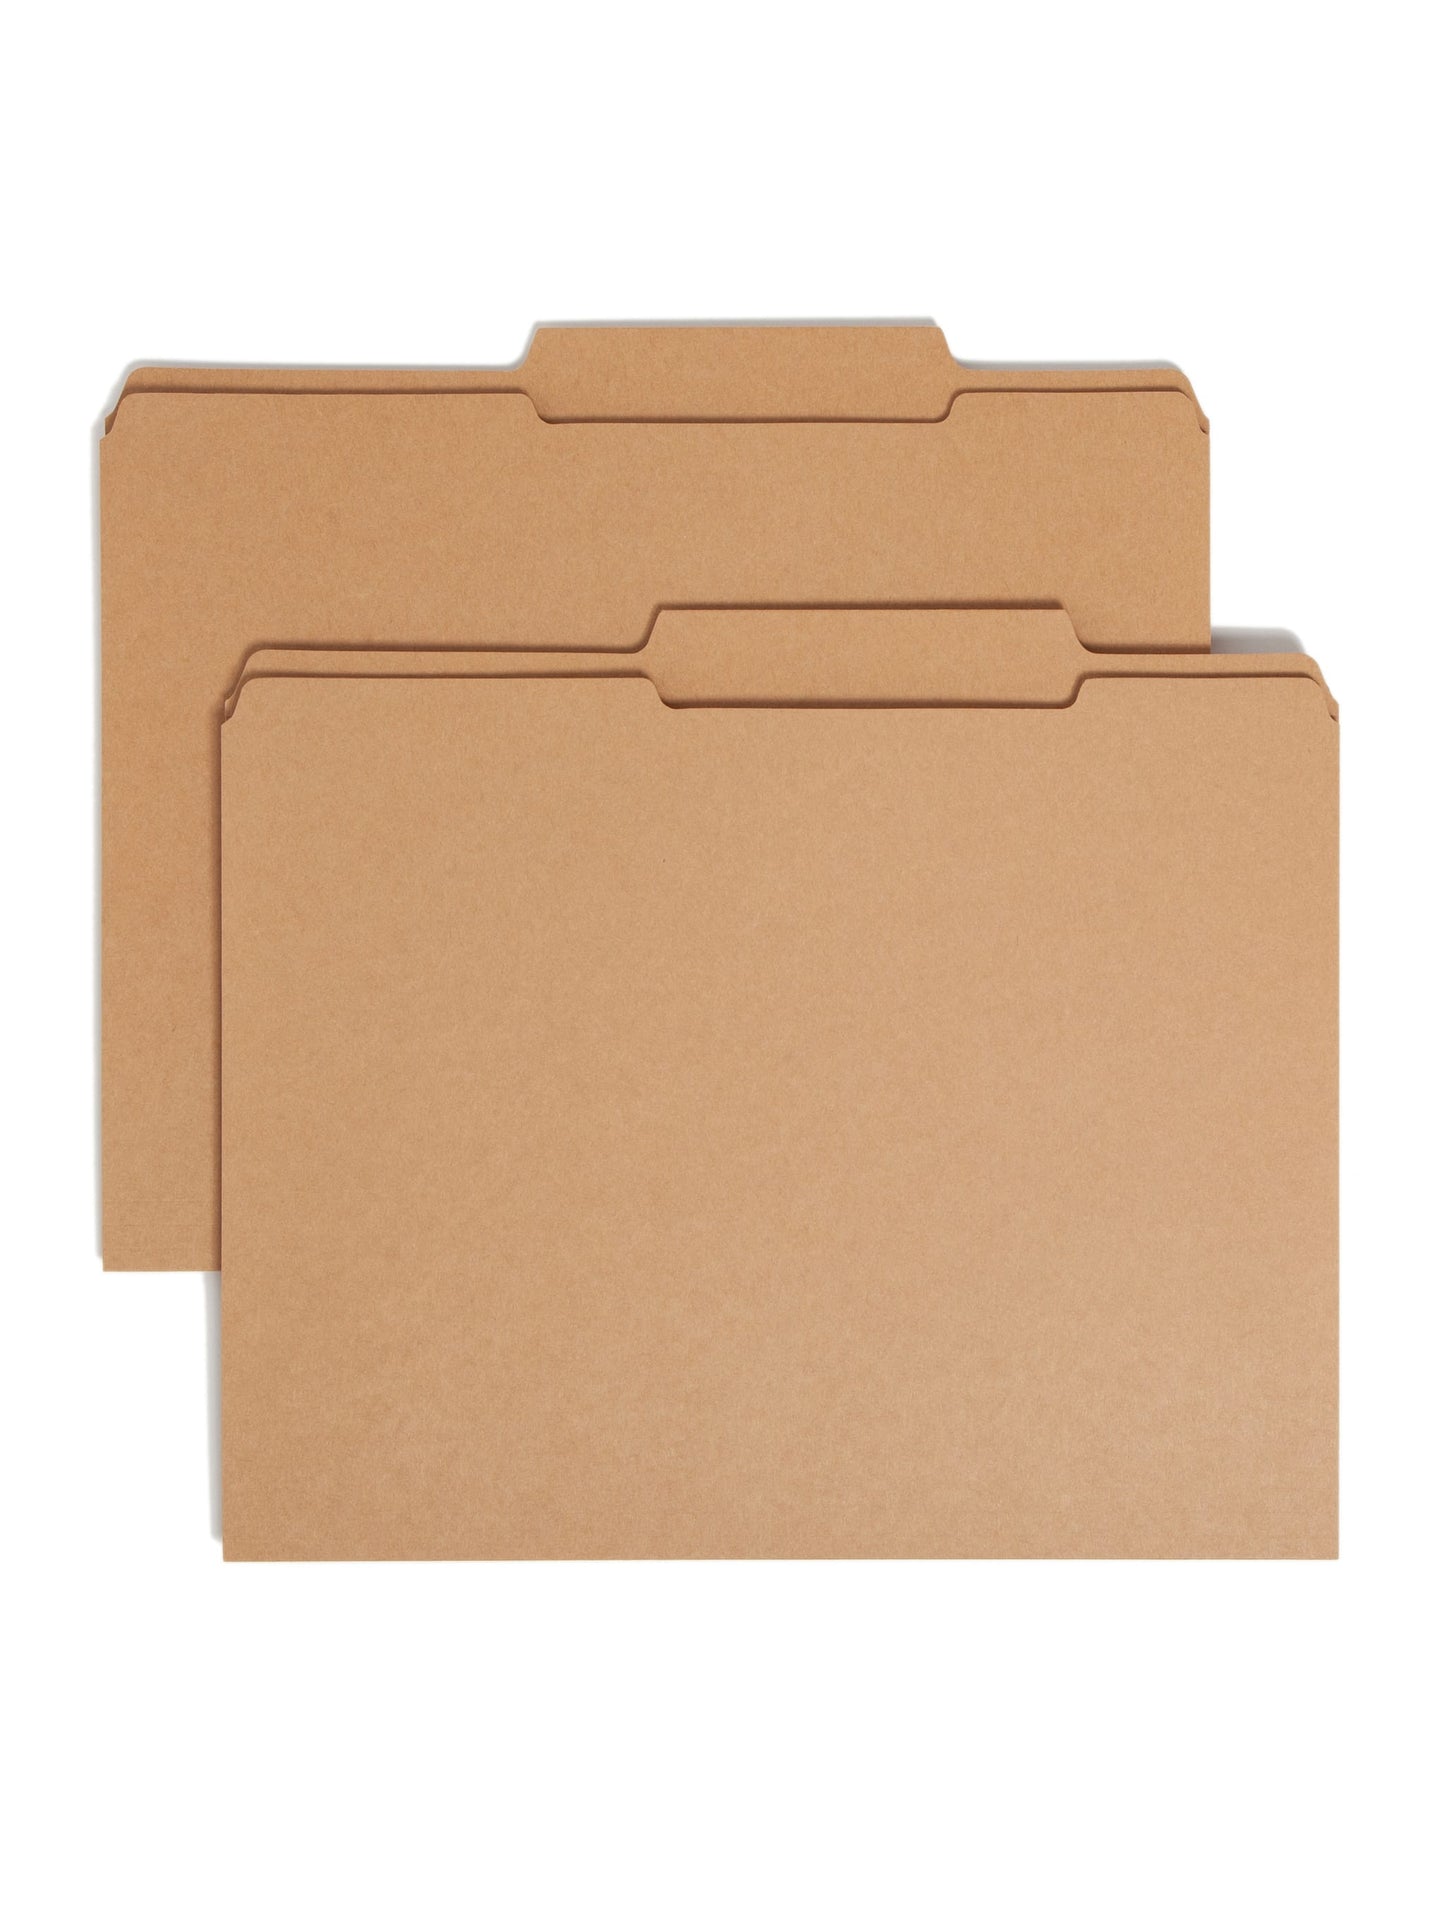 Reinforced Tab File Folders, 2/5-Cut Right of Center Tab, Kraft Color, Letter Size, Set of 100, 086486107761